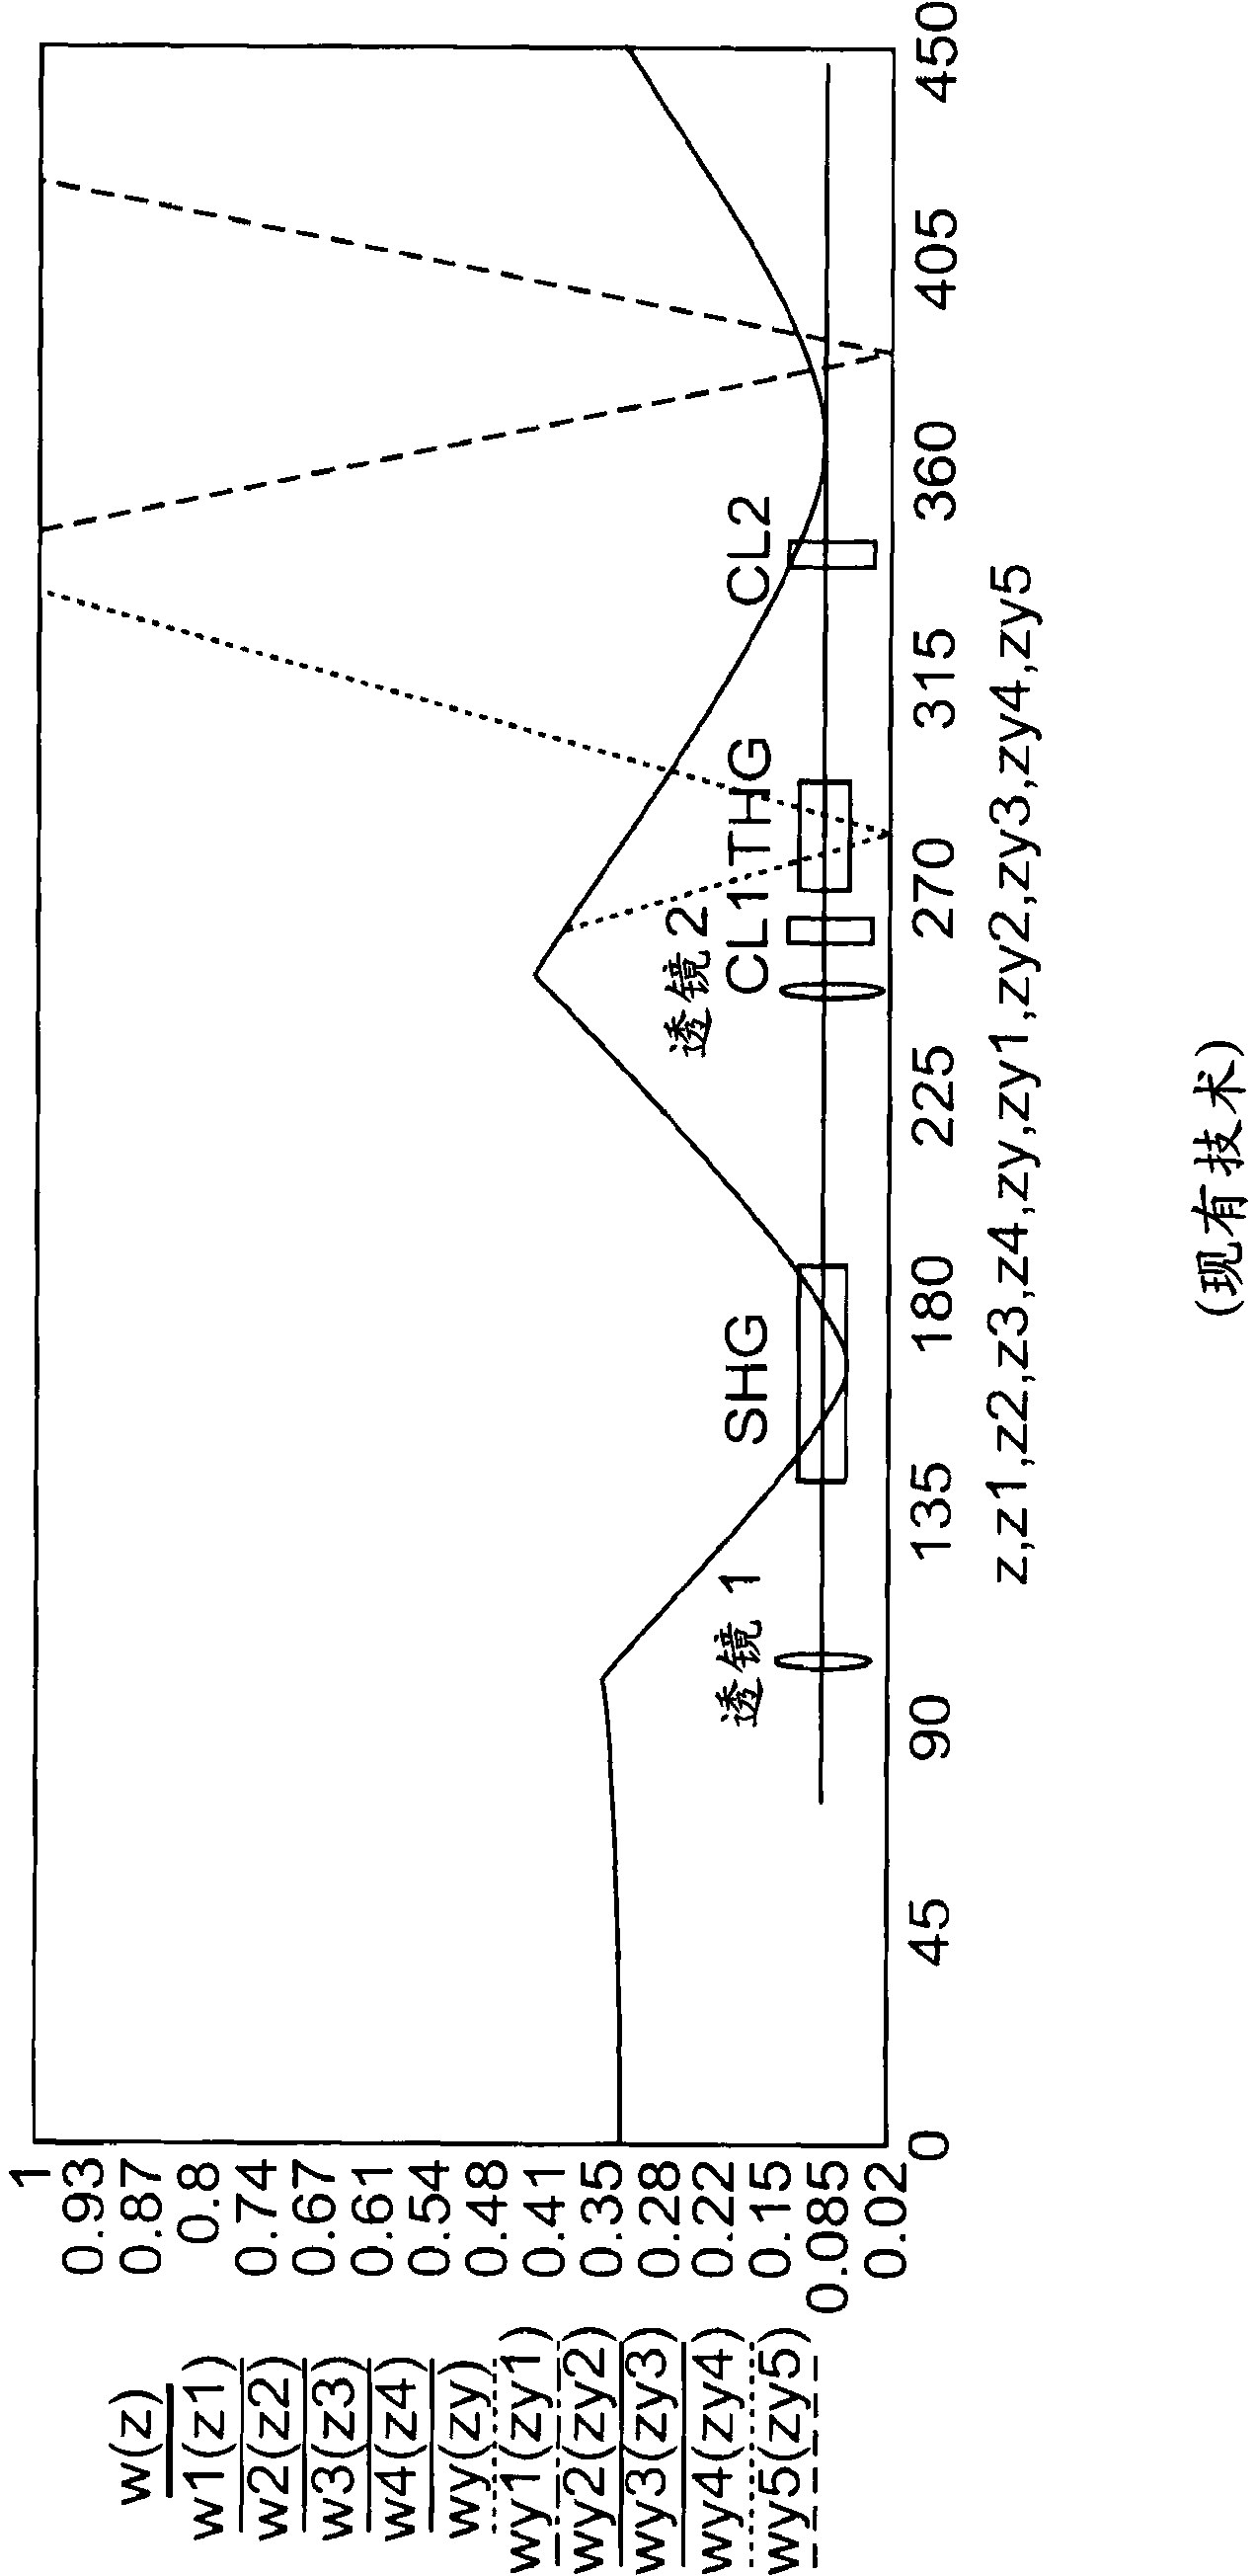 Wedge-faceted nonlinear crystal for harmonic generation